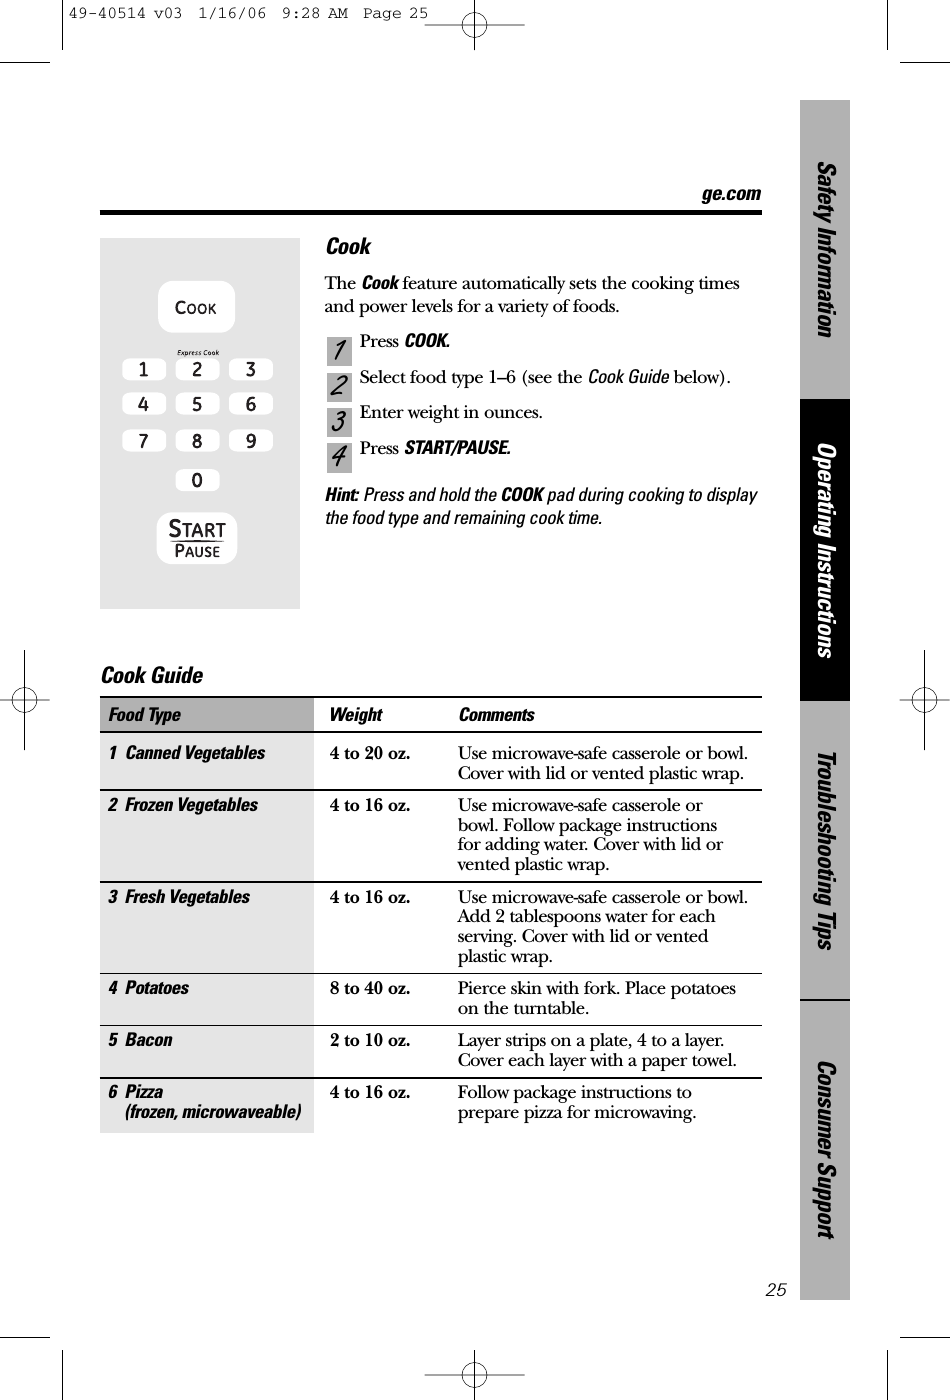 ge.comConsumer SupportTroubleshooting TipsOperating InstructionsSafety InformationCookThe Cook feature automatically sets the cooking timesand power levels for a variety of foods.Press COOK.Select food type 1–6 (see the Cook Guide below).Enter weight in ounces.Press START/PAUSE.Hint: Press and hold the COOK pad during cooking to displaythe food type and remaining cook time.43211 Canned Vegetables 4 to 20 oz. Use microwave-safe casserole or bowl. Cover with lid or vented plastic wrap.2 Frozen Vegetables 4 to 16 oz. Use microwave-safe casserole or bowl. Follow package instructions for adding water. Cover with lid or vented plastic wrap.3 Fresh Vegetables 4 to 16 oz. Use microwave-safe casserole or bowl. Add 2 tablespoons water for eachserving. Cover with lid or vented plastic wrap.4 Potatoes 8 to 40 oz. Pierce skin with fork. Place potatoes on the turntable.5 Bacon 2 to 10 oz. Layer strips on a plate, 4 to a layer.Cover each layer with a paper towel.6 Pizza 4 to 16 oz. Follow package instructions to (frozen, microwaveable) prepare pizza for microwaving.Food Type Weight Comments25Cook Guide 49-40514 v03  1/16/06  9:28 AM  Page 25